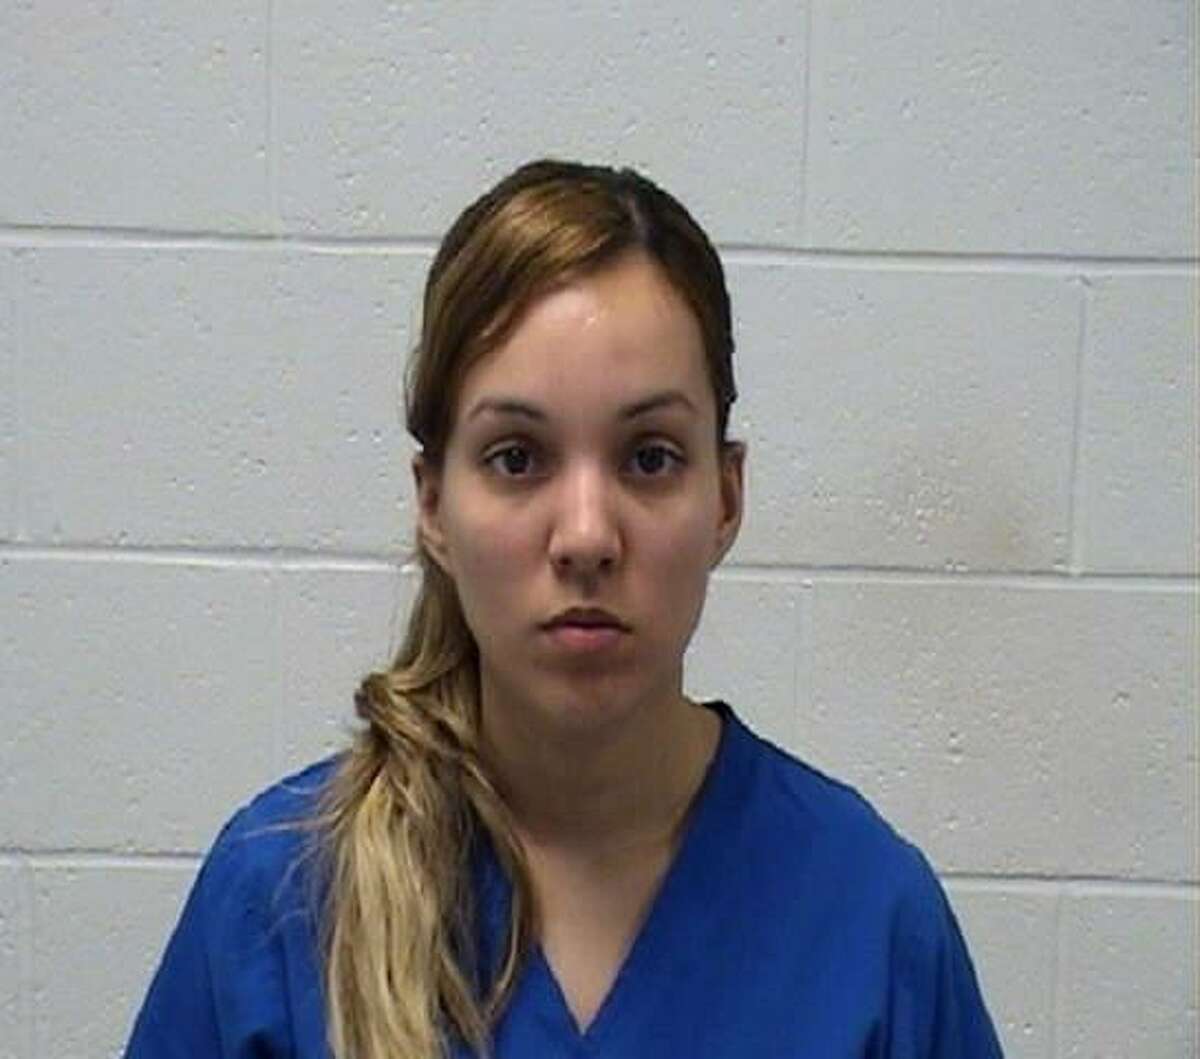 Stephanie Clavell, 24, of 1728 Meriden Road., Waterbury, is being charged with second-degree manslaughter, operating a motor vehicle whil using a hand held device, and operating an unregistered vehicle. WTNH News 8